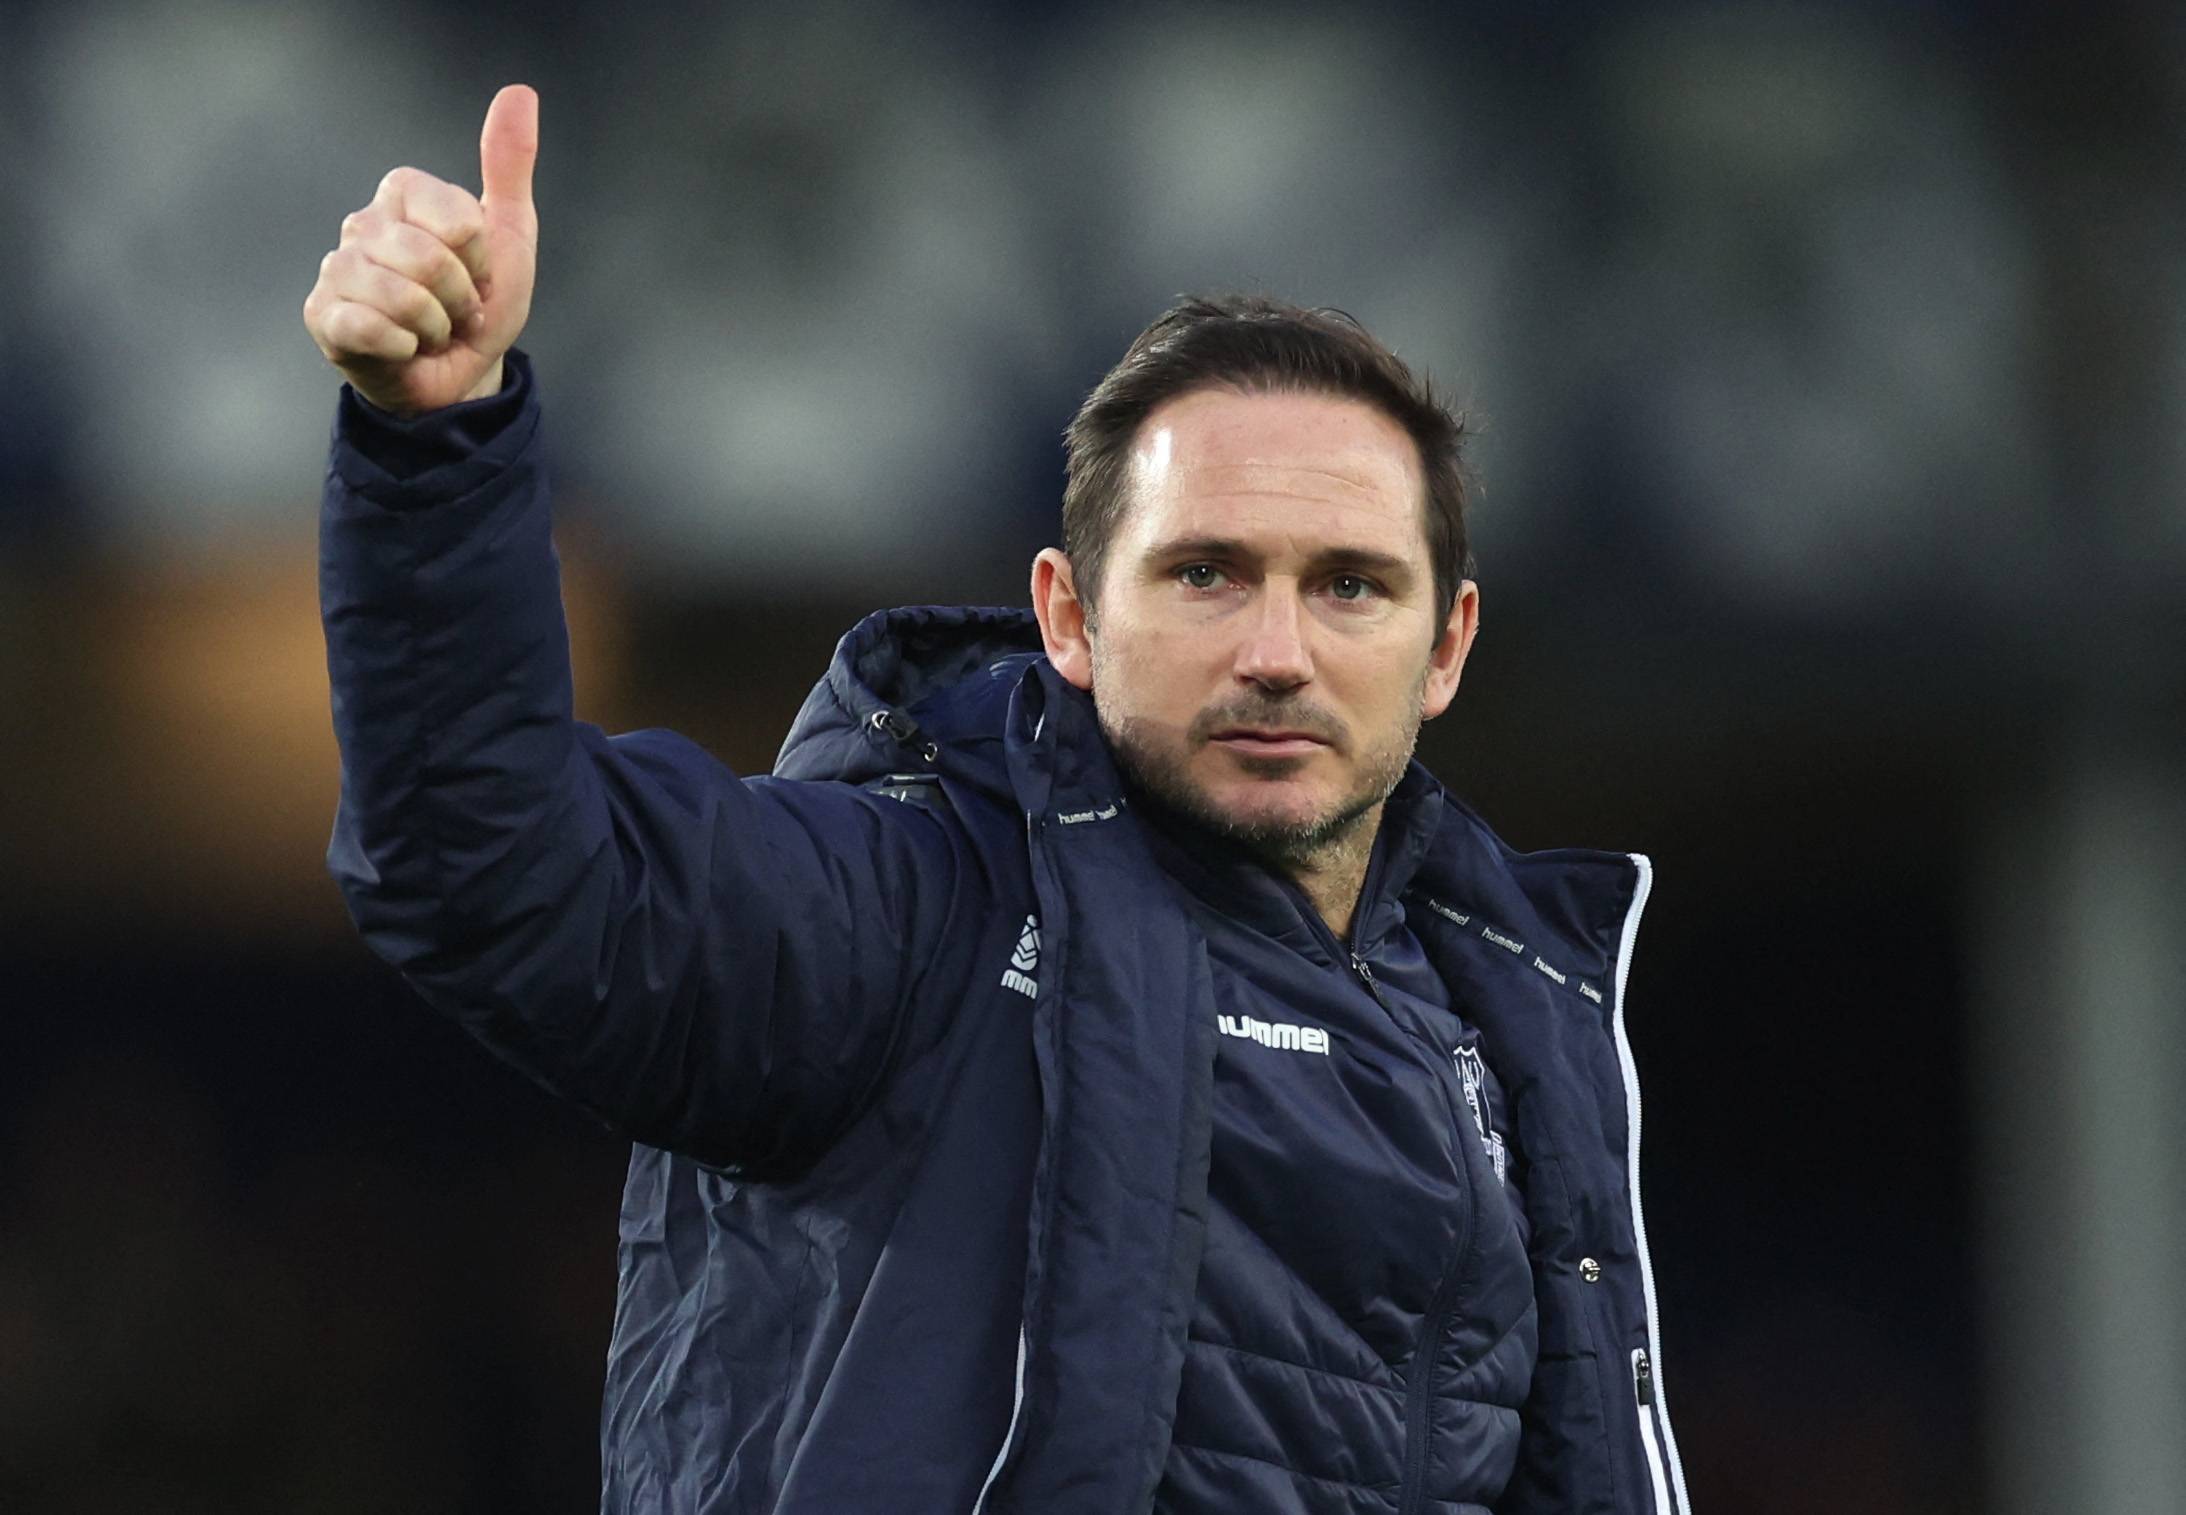 Everton's Lampard gives a thumbs up